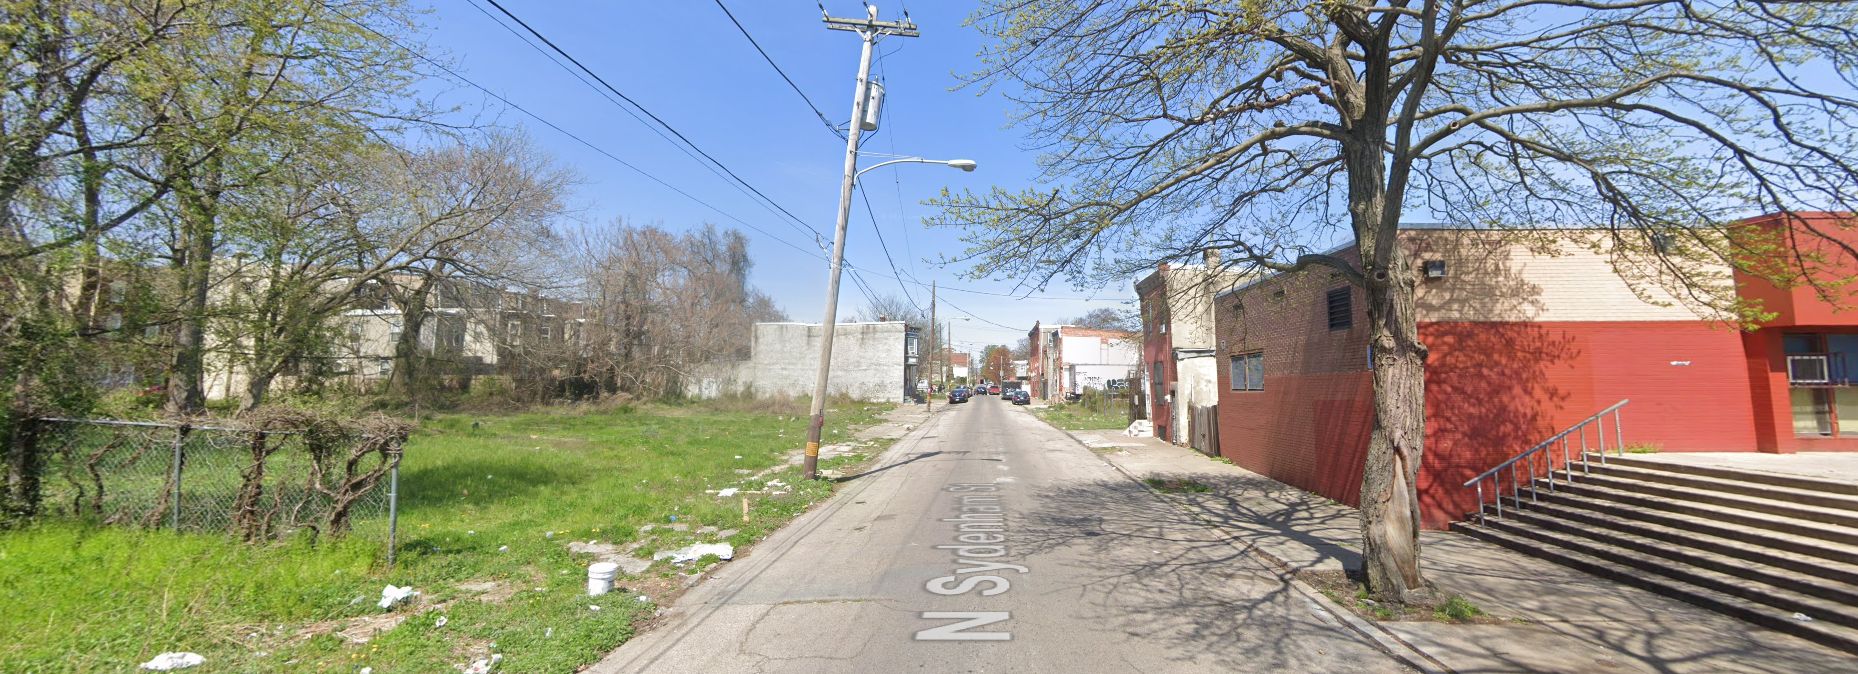 North Sydenham Street, with 2314 North Sydenham Street on the left. Site conditions prior to redevelopment. Looking north. April 2023. Credit: Google Maps